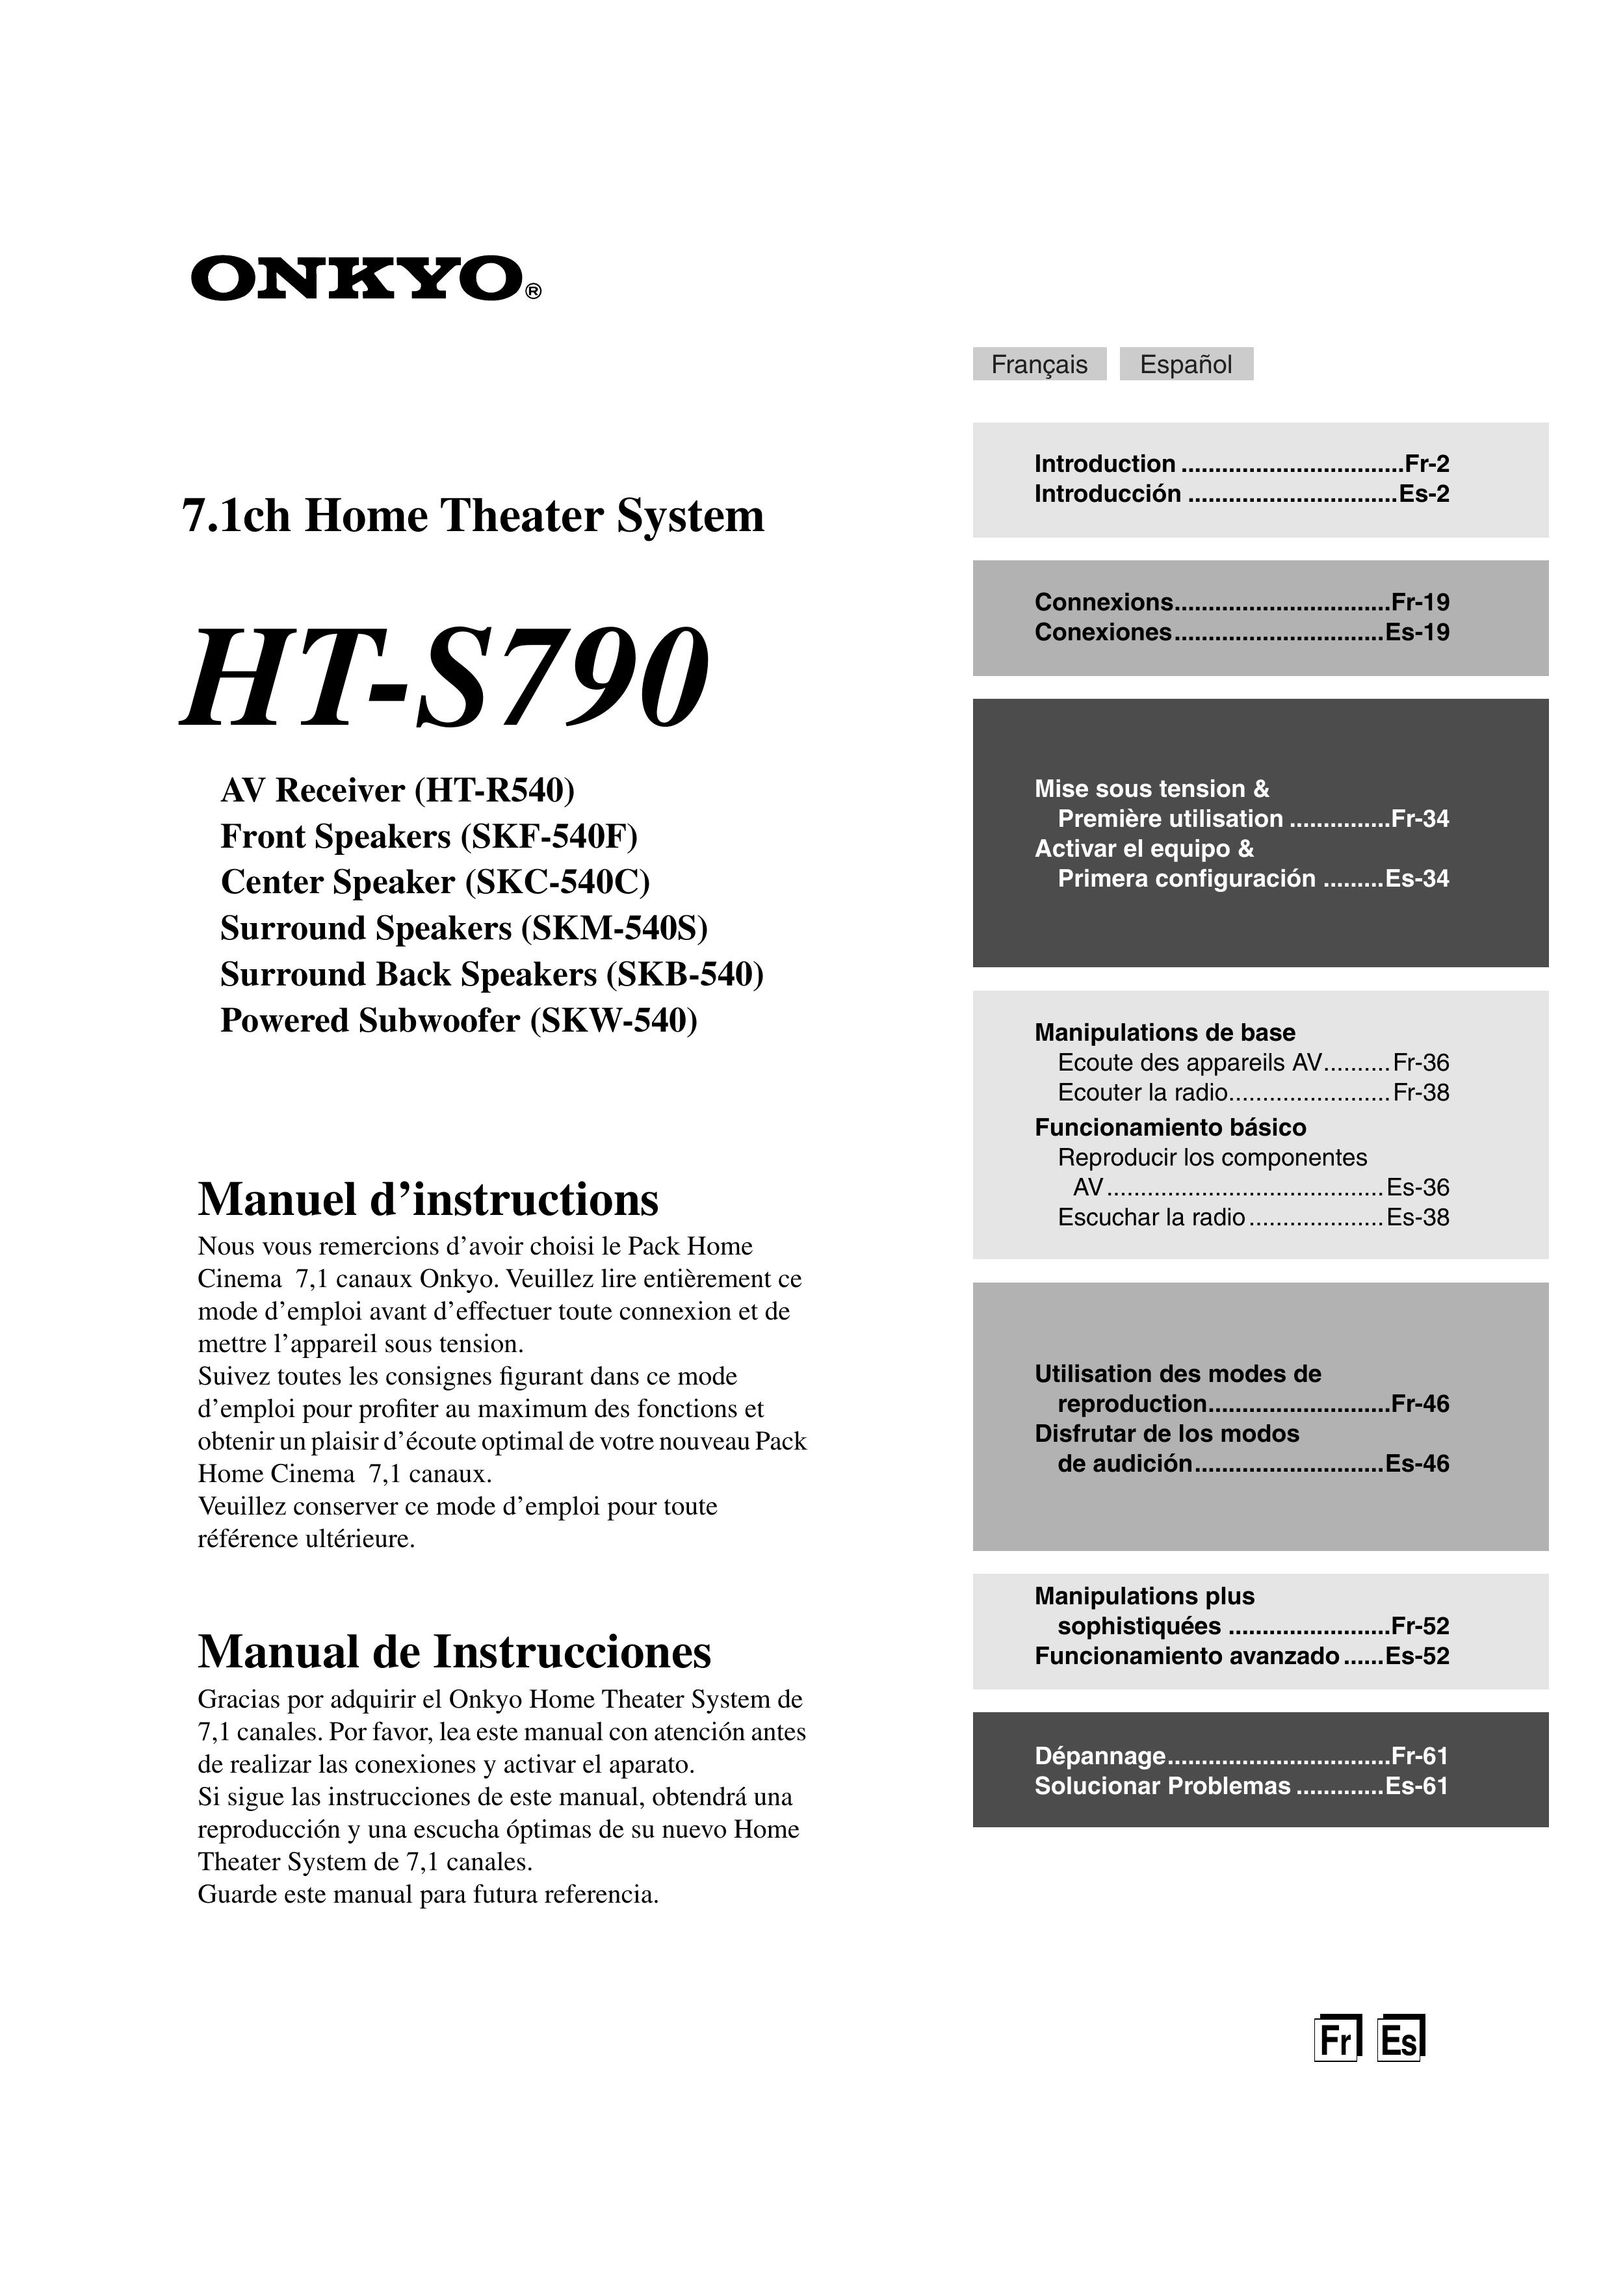 Panasonic HT-S790 Home Theater System User Manual